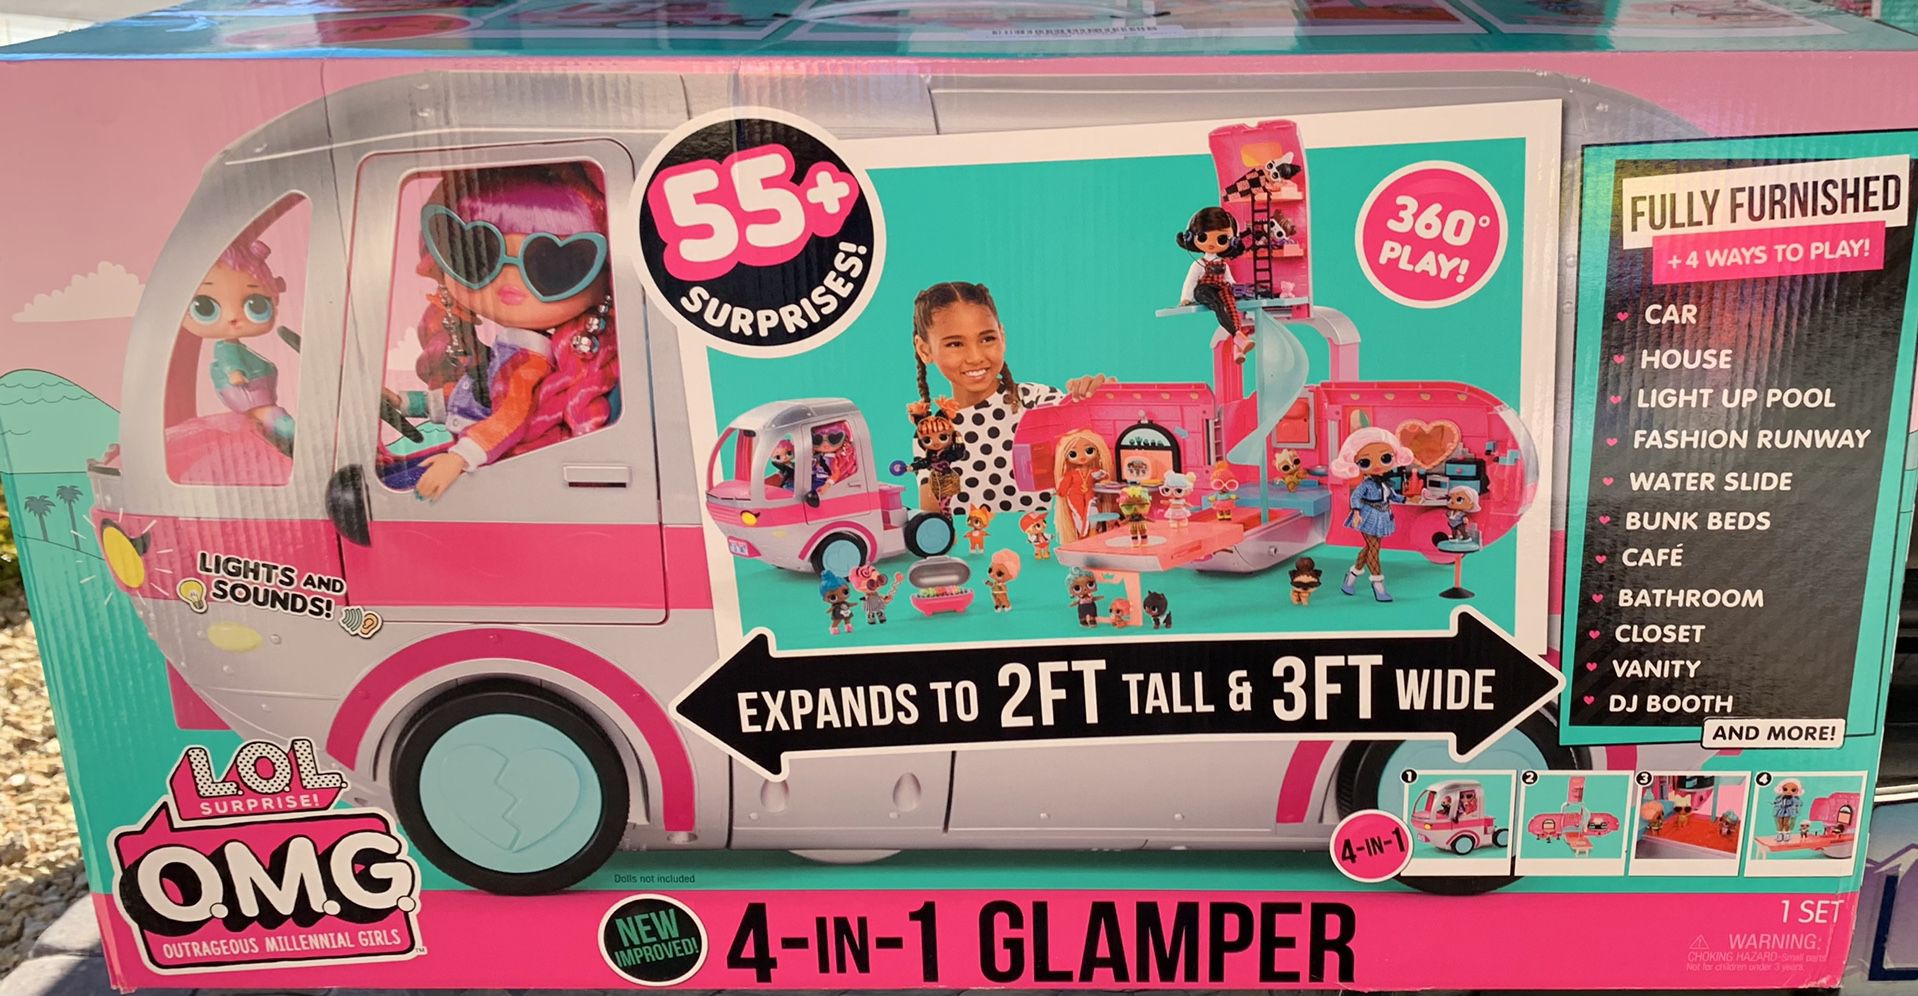 New L.O.L. LOL Surprise OMG 4-in-1 Glamper  Camper Doll Playset with 55+ Surprises